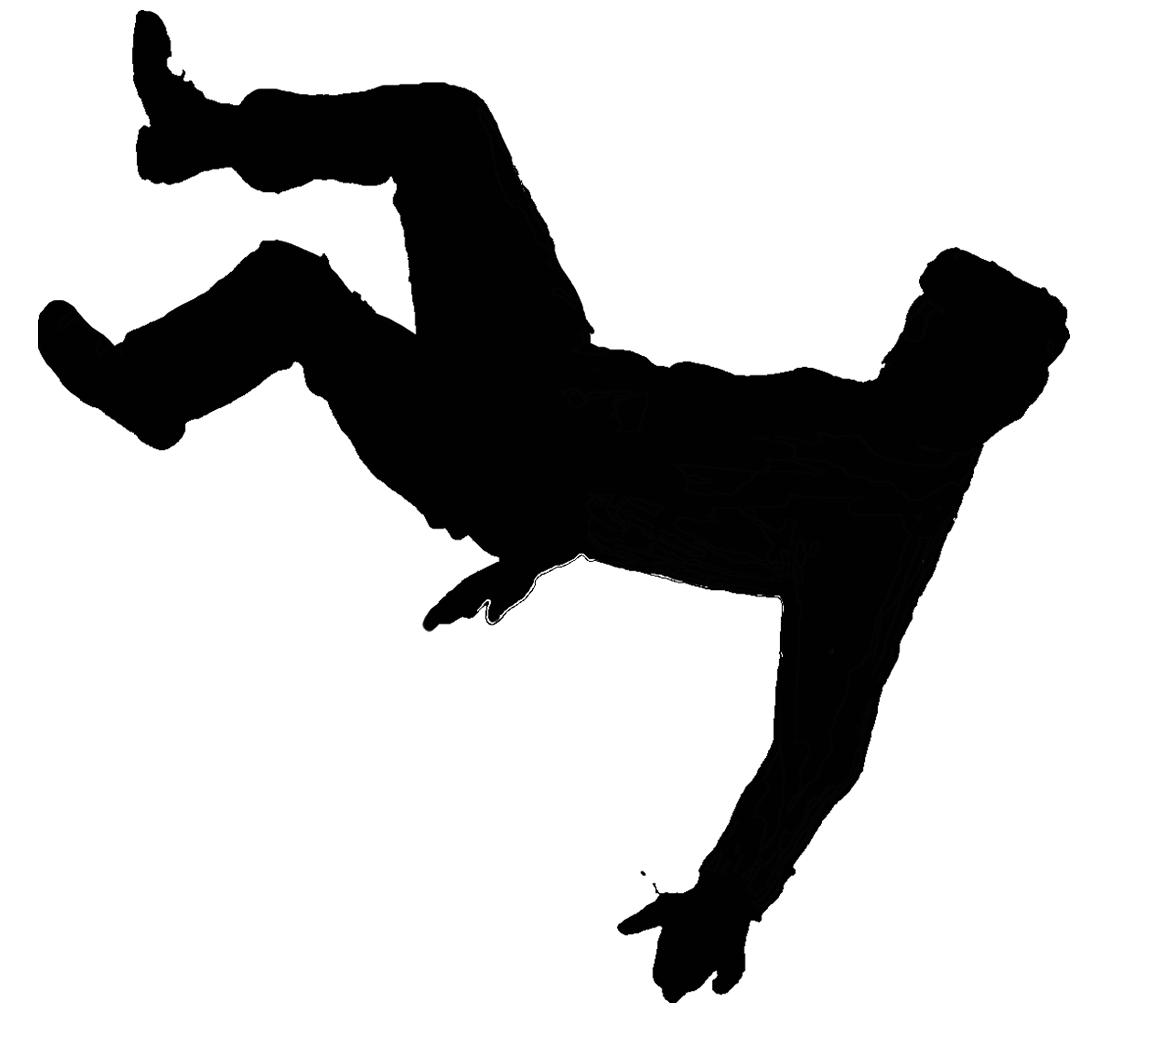 Jumping clipart shadow person. Falling man silhouette at